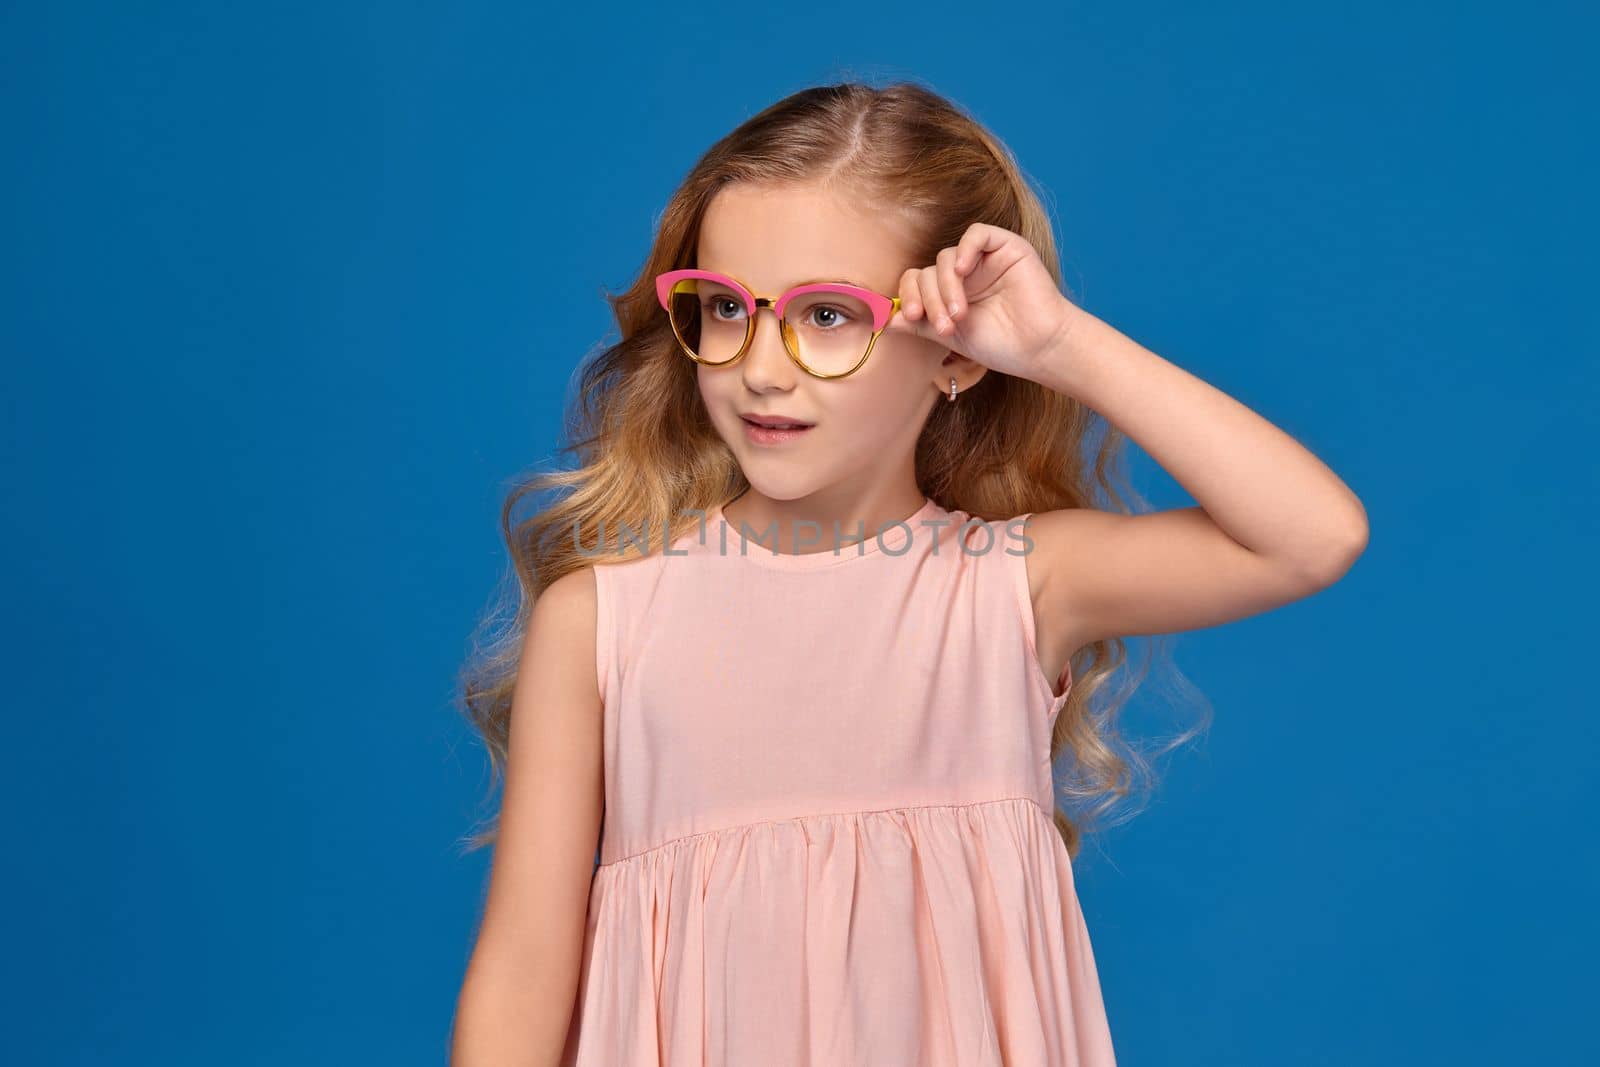 Funny little girl in a pink dress is straightense her fashionable glasses, standing on a blue background.